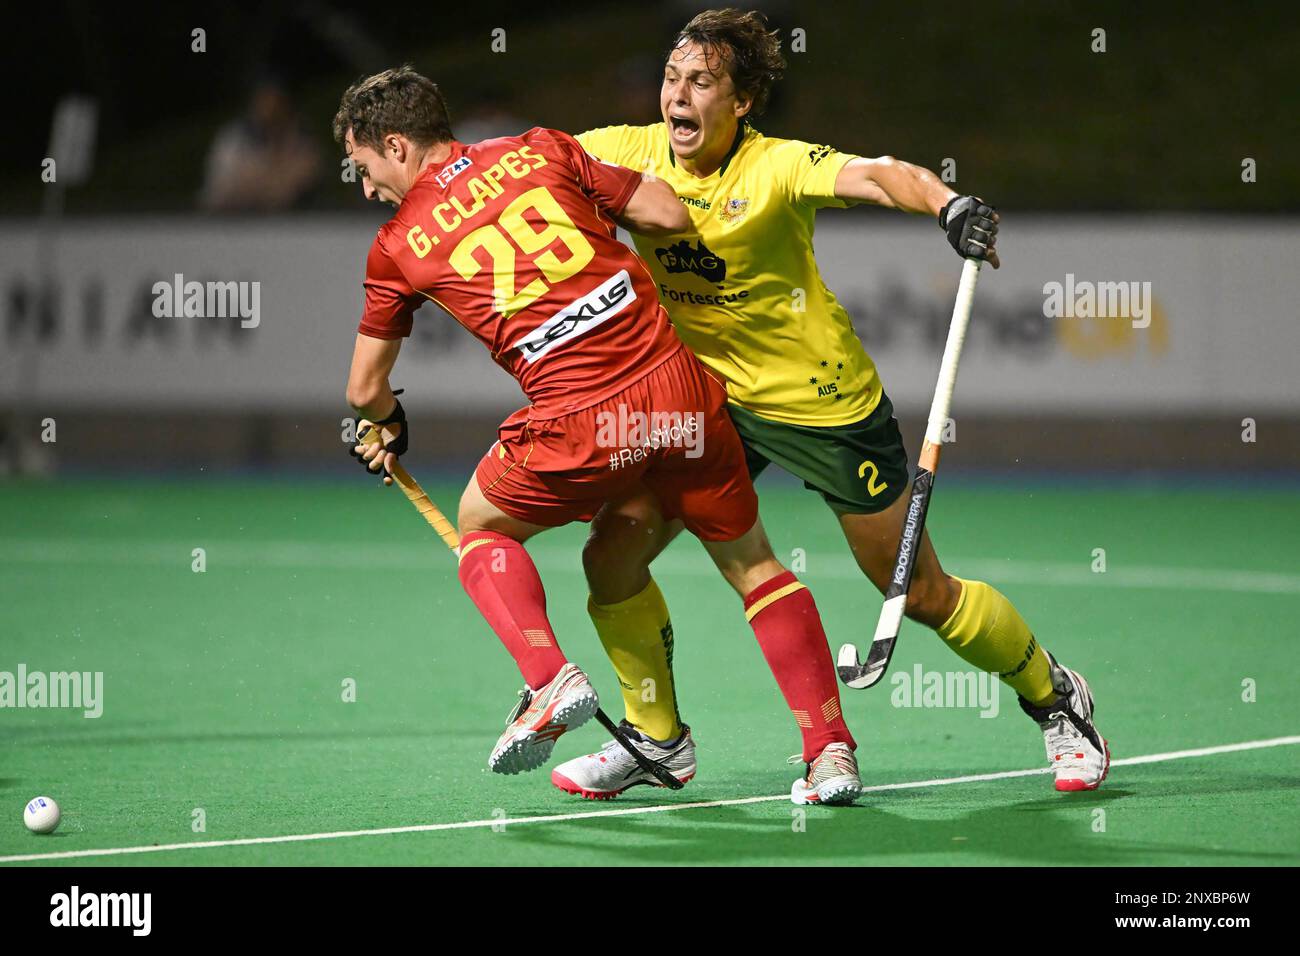 Hobart, Australia. 01st Mar, 2023. Gerard Clapés (L) of Spain Men's National field hockey team and Tom Craig (R) of Australia National Men's field hockey team in action during the 2022/23 International Hockey Federation (FIH) Men's Pro-League match between Australia and Spain held at the Tasmanian Hockey Centre in Hobart. Final score Spain 4:2 Australia. Credit: SOPA Images Limited/Alamy Live News Stock Photo